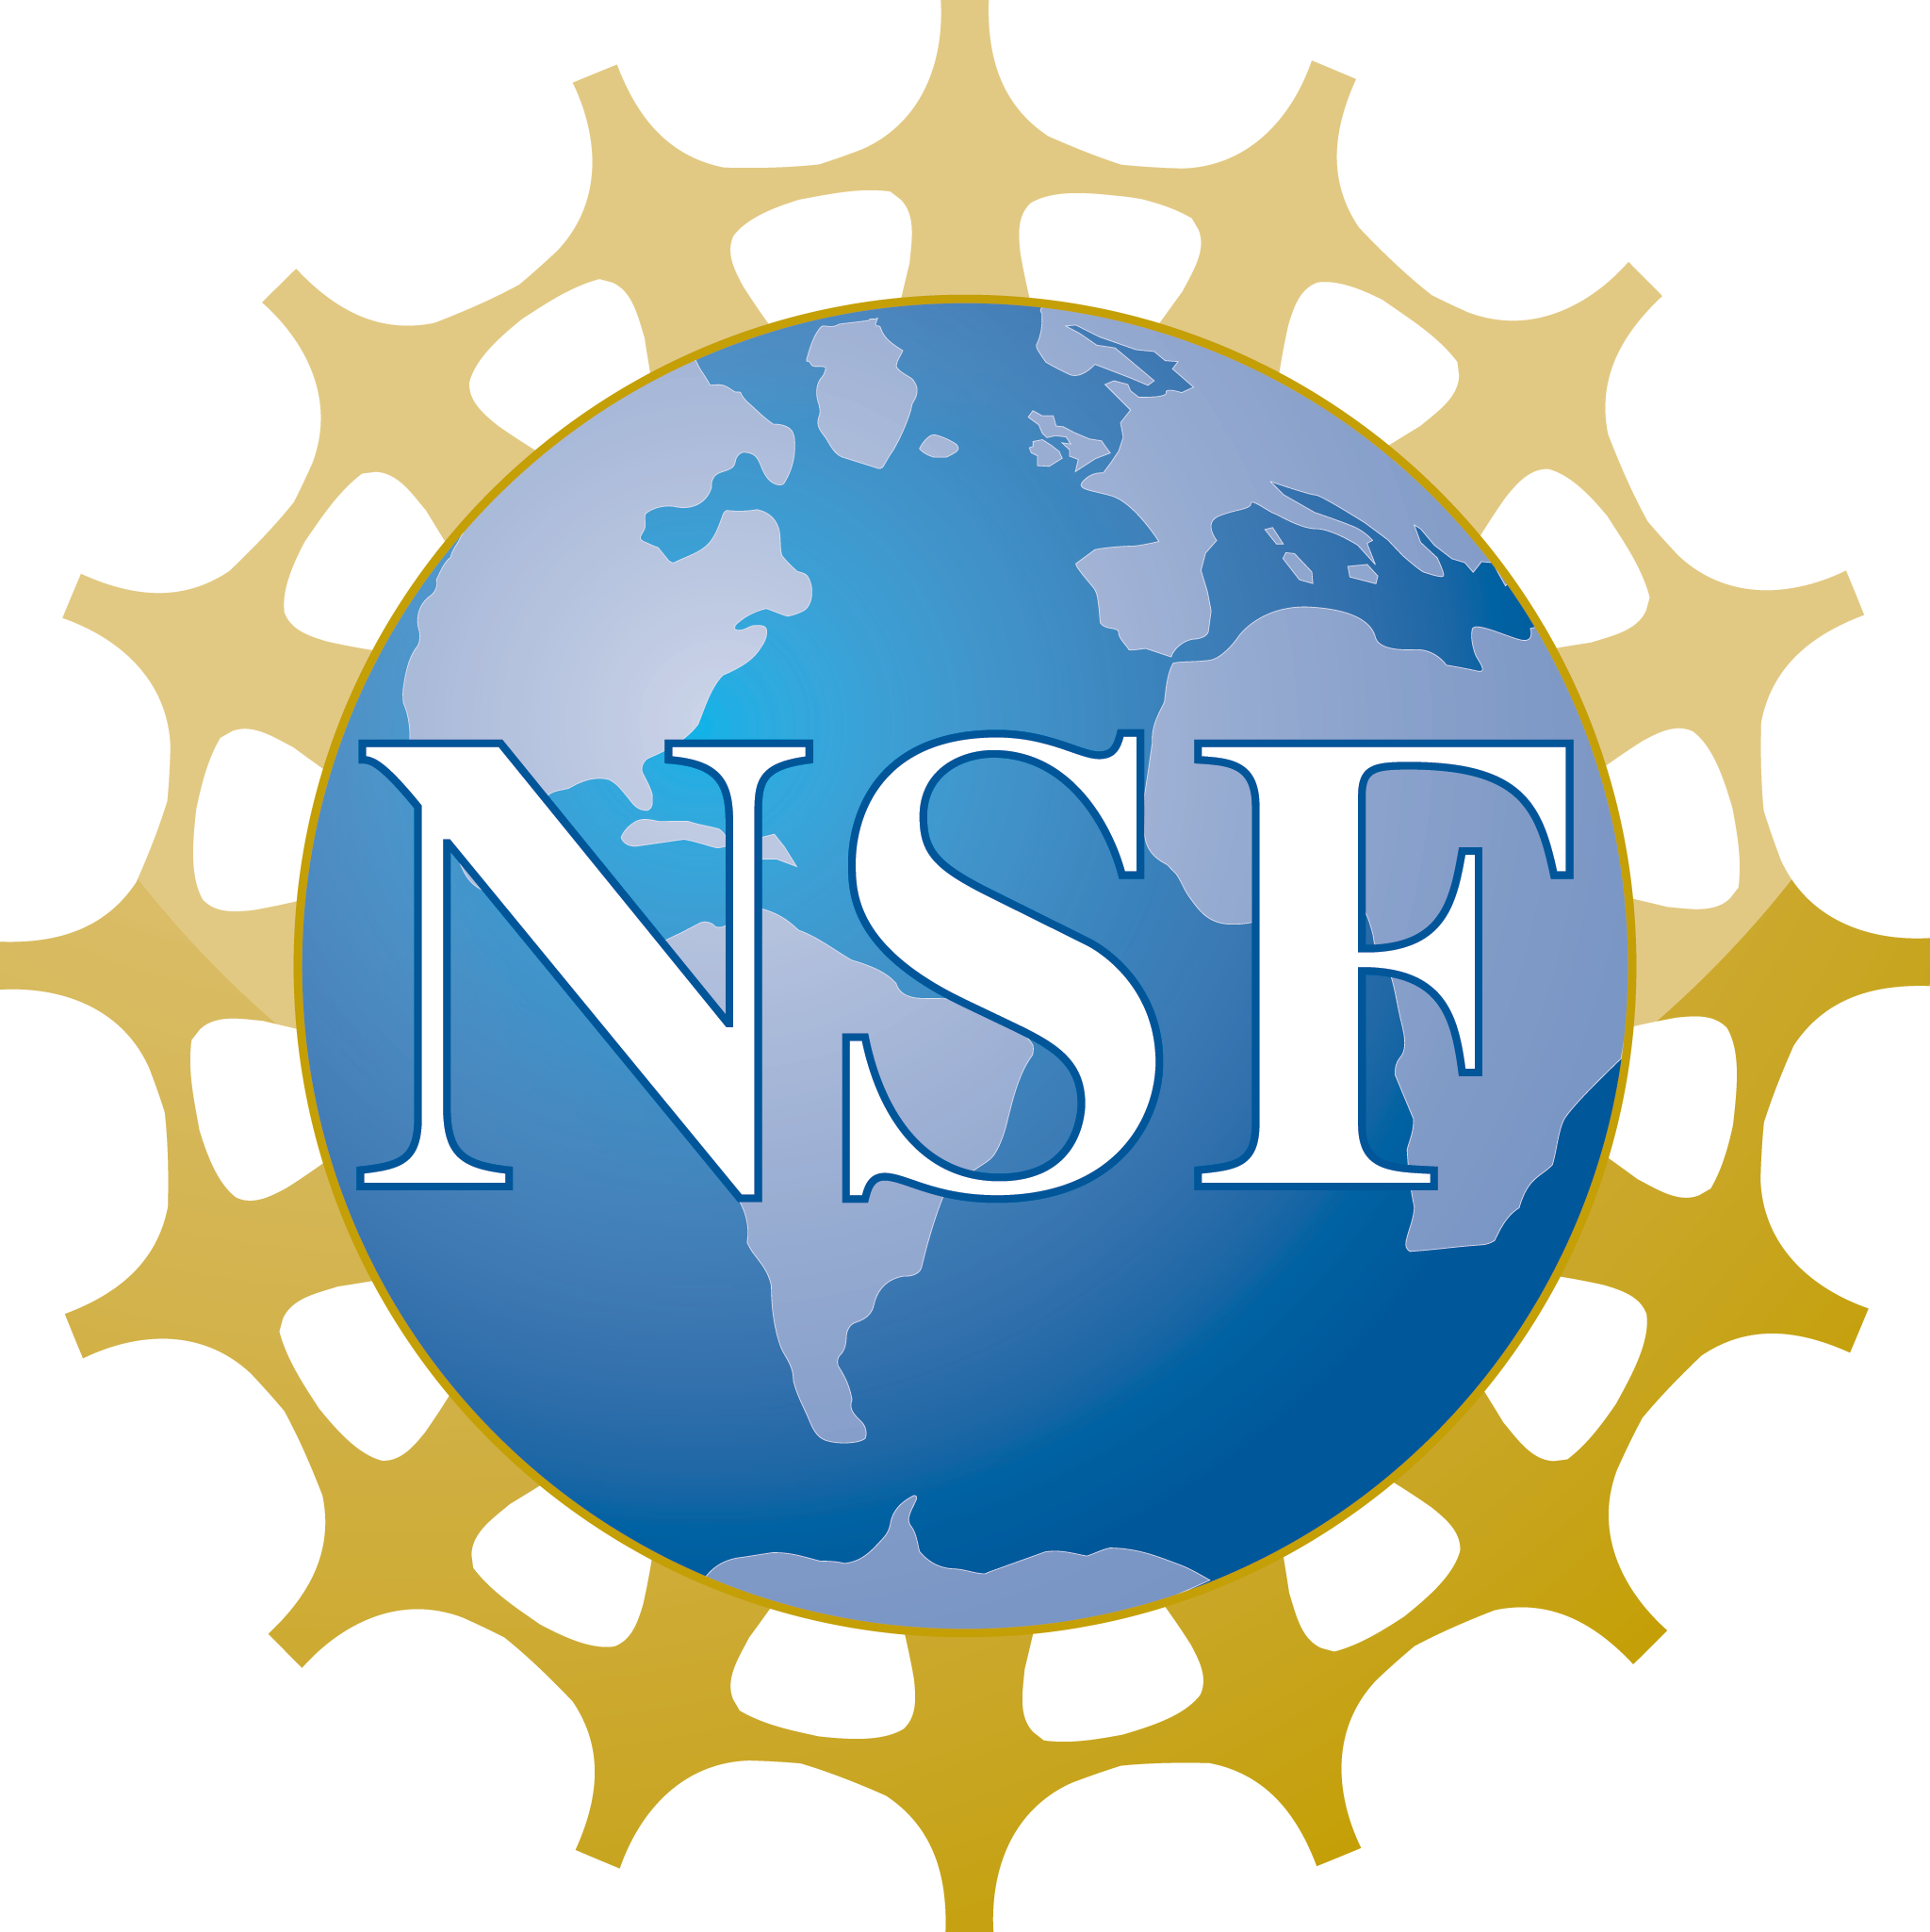 NSF: national science foundation